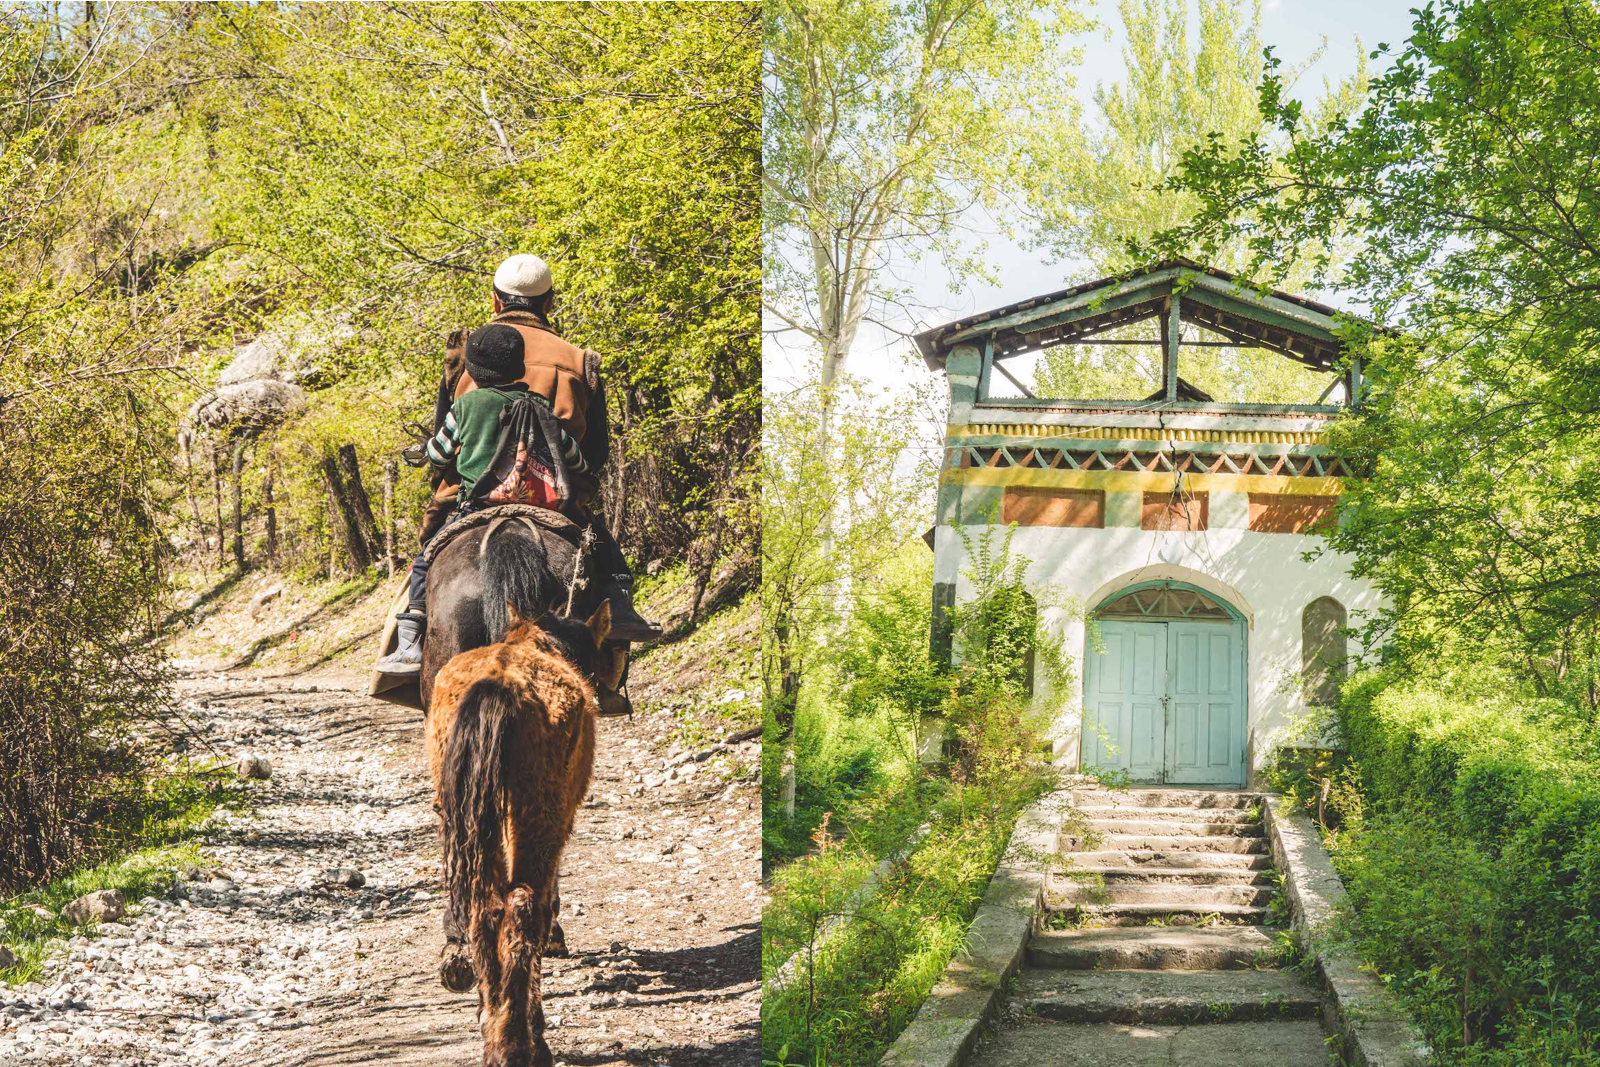 world's largest walnut forest temple and horseback rider